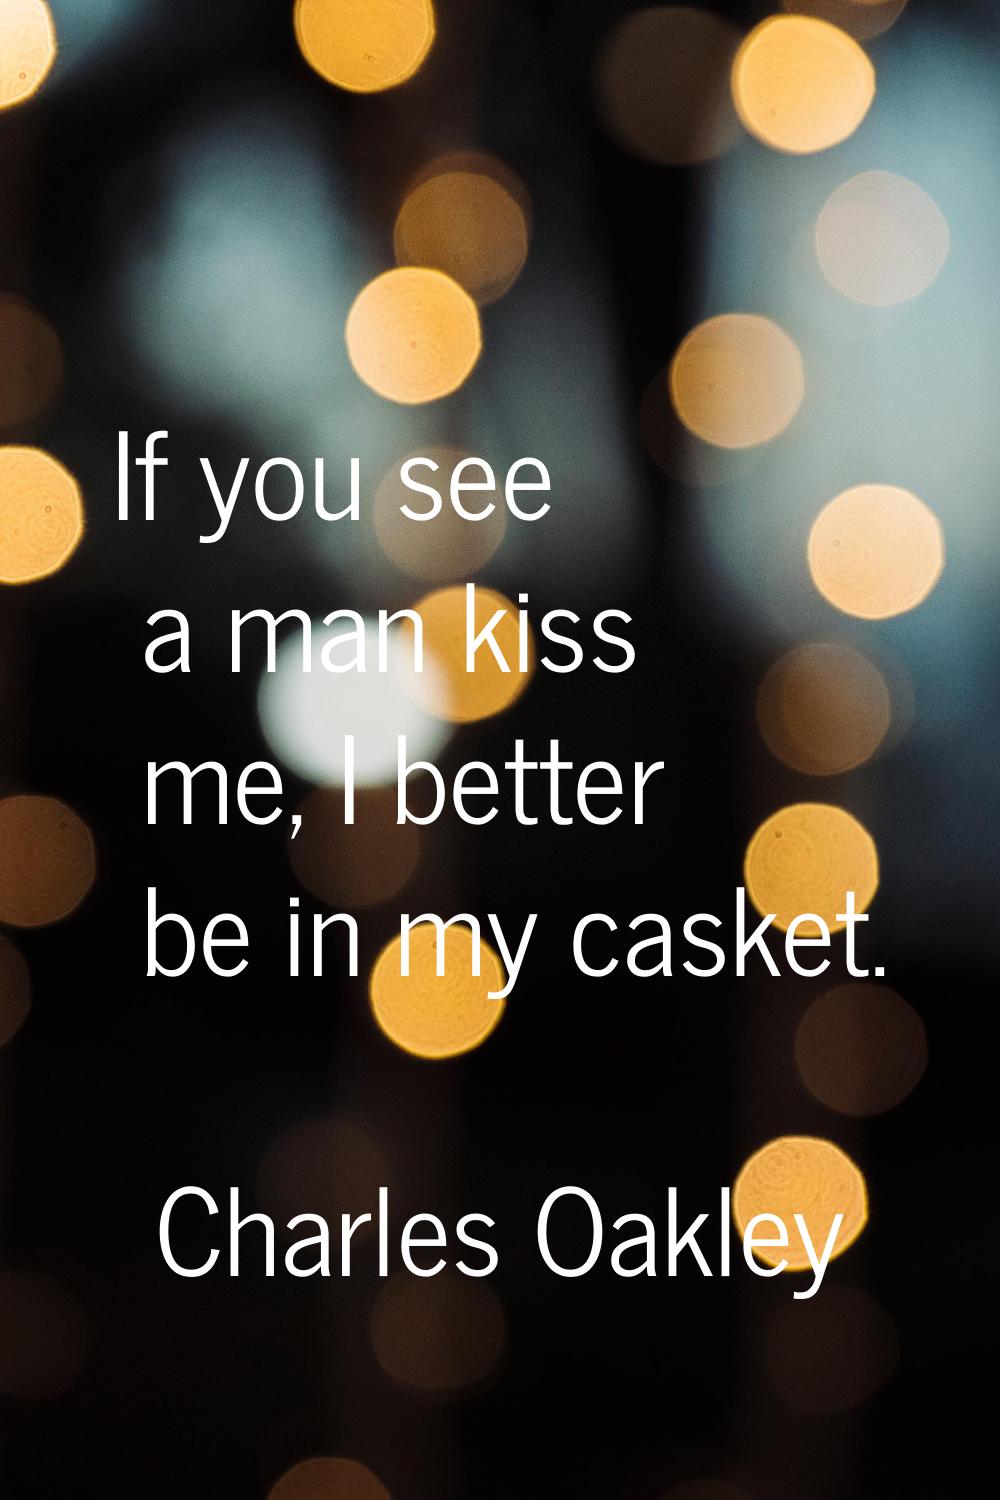 If you see a man kiss me, I better be in my casket.